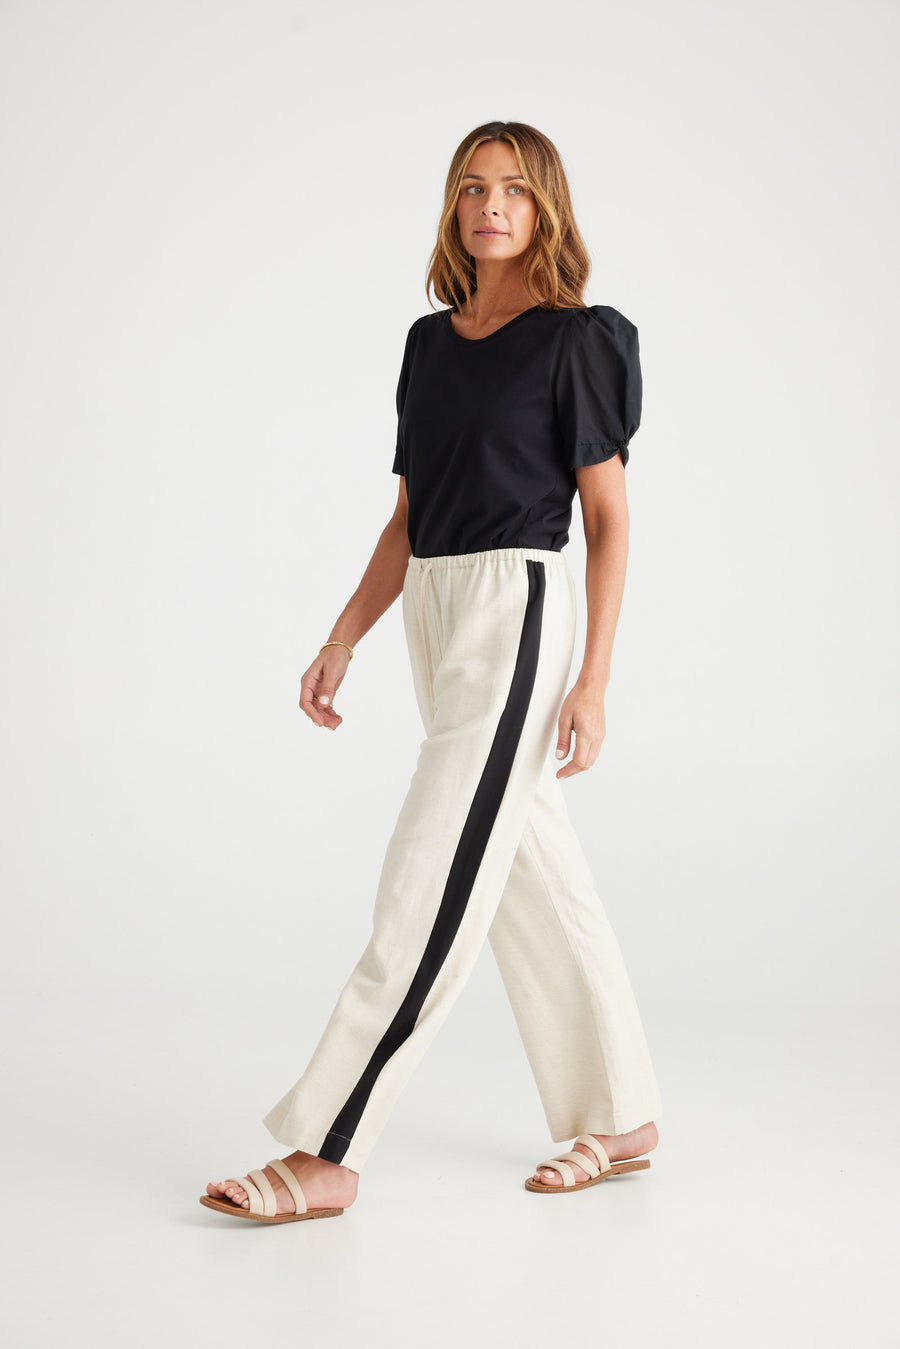 Second Valley Pants - Natural + Black